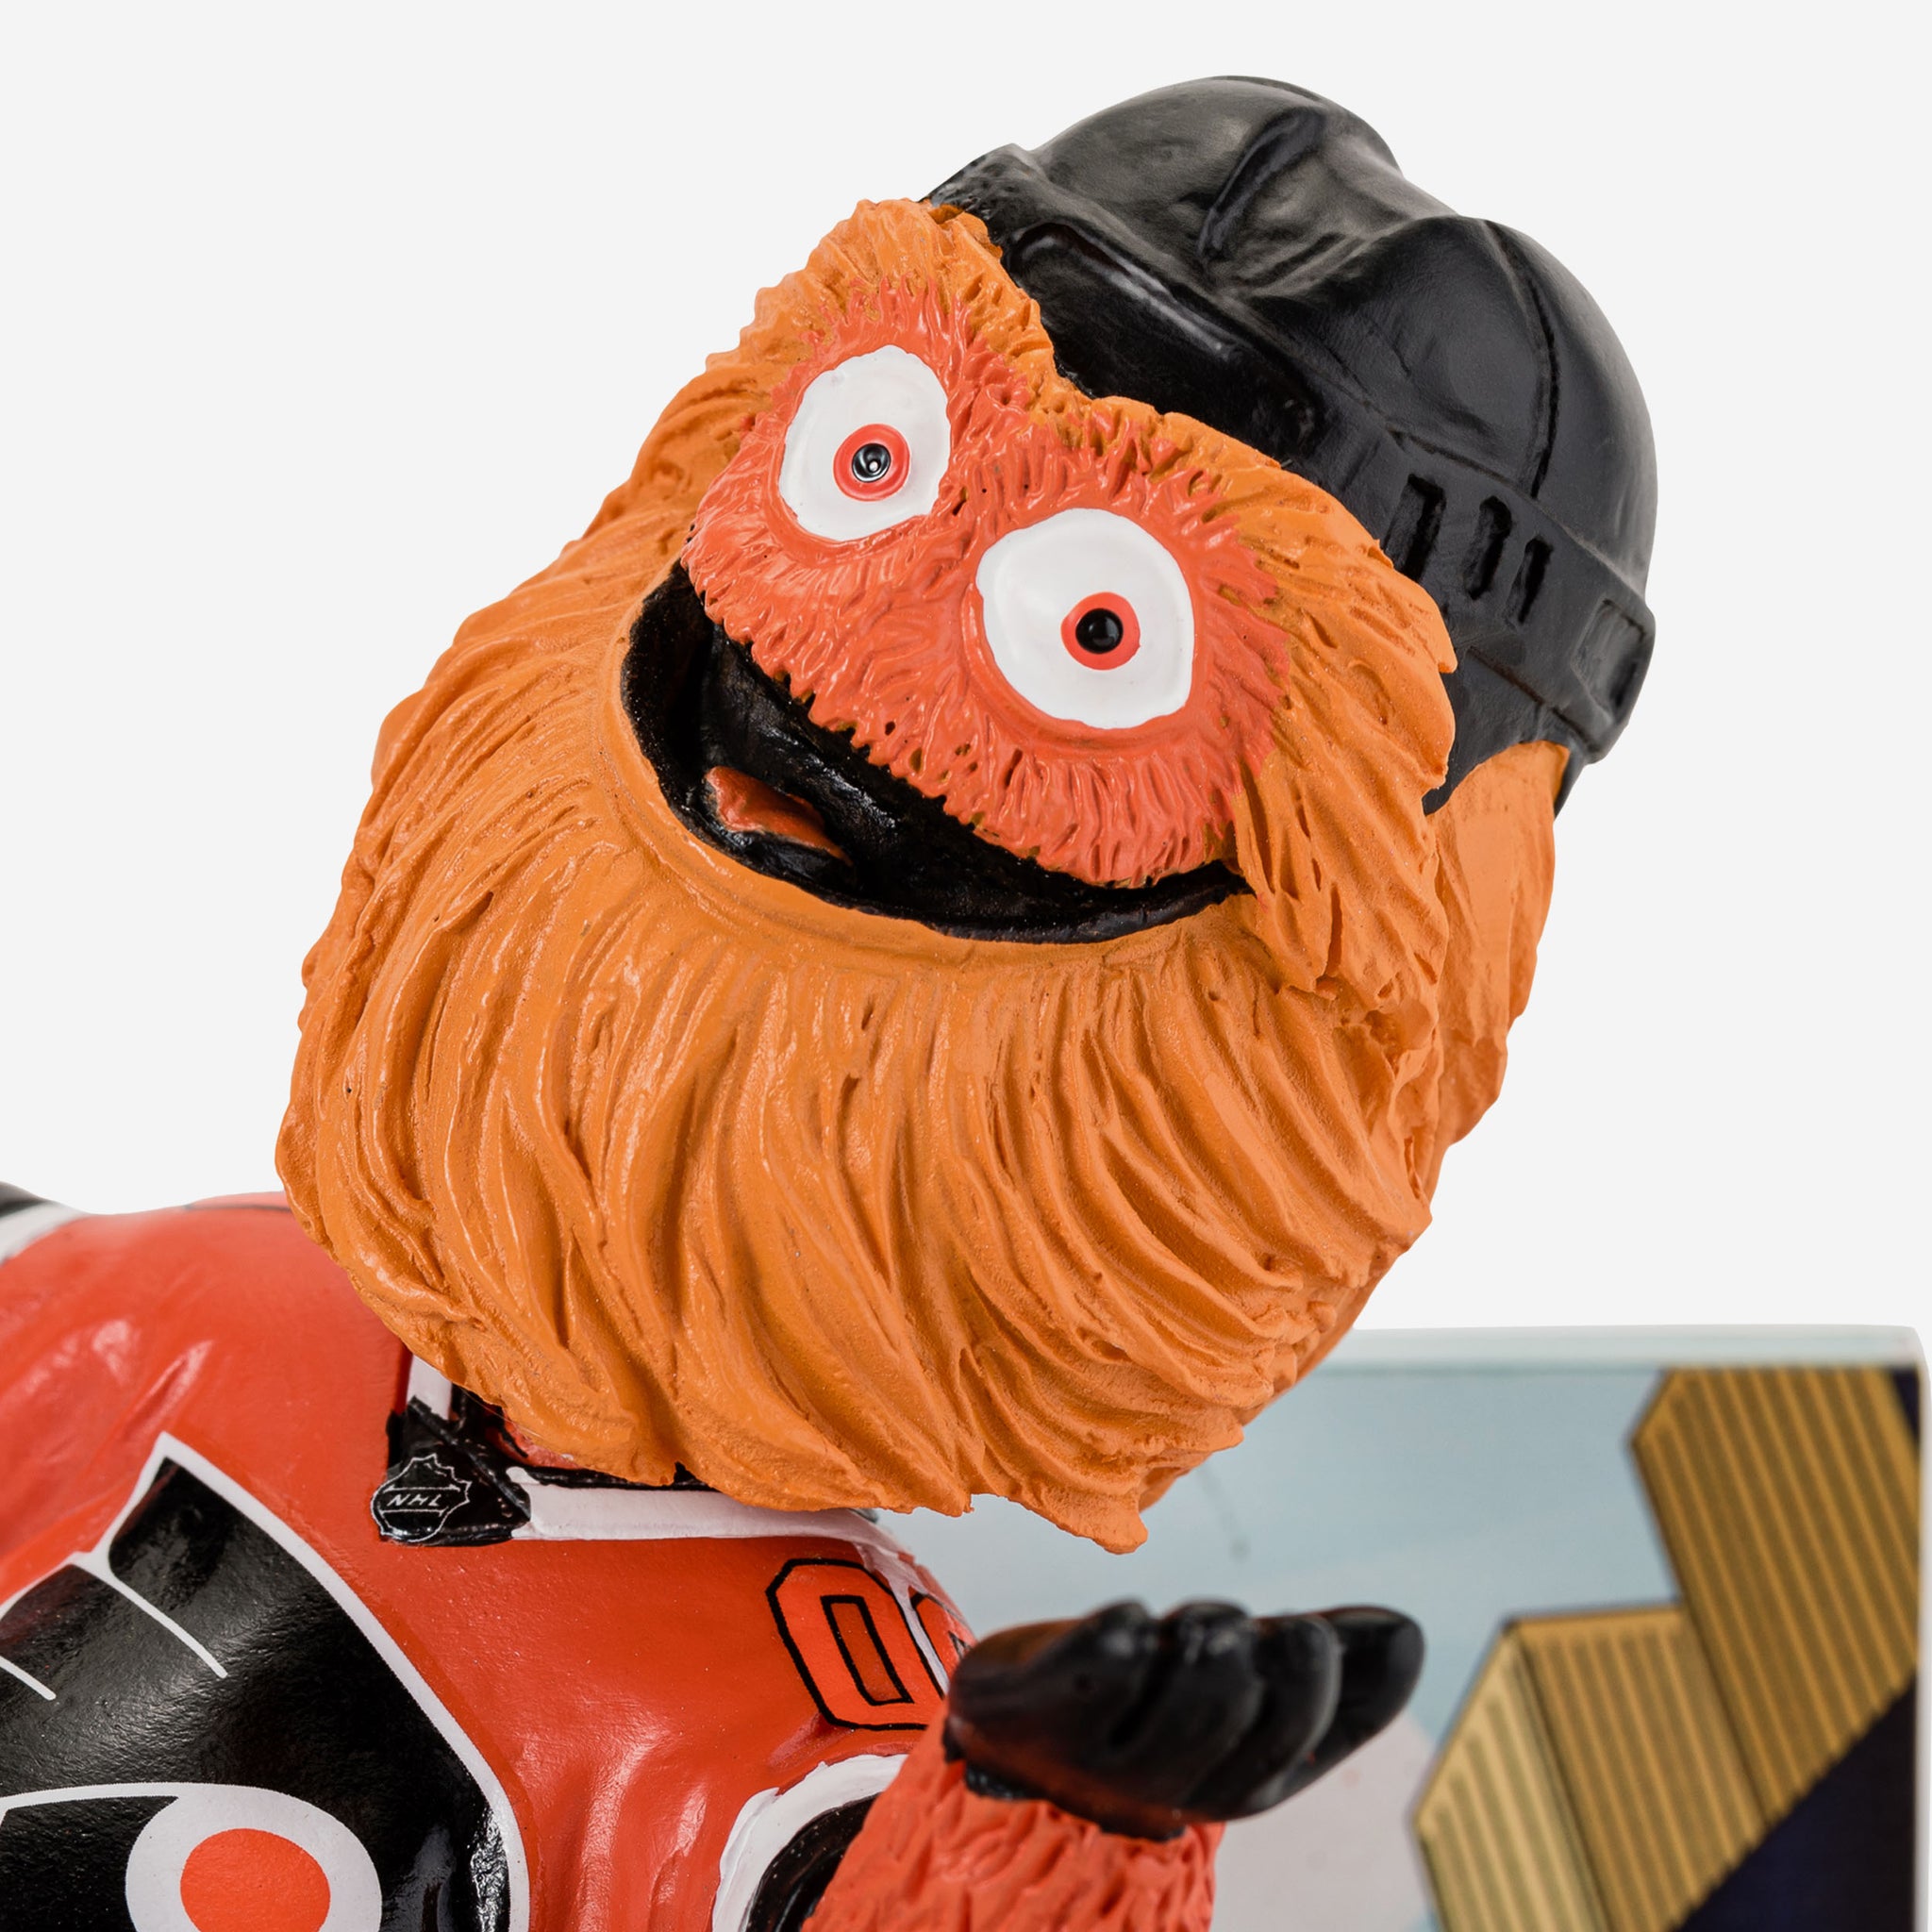 So this is Gritty, the new Flyers mascot : r/philadelphia